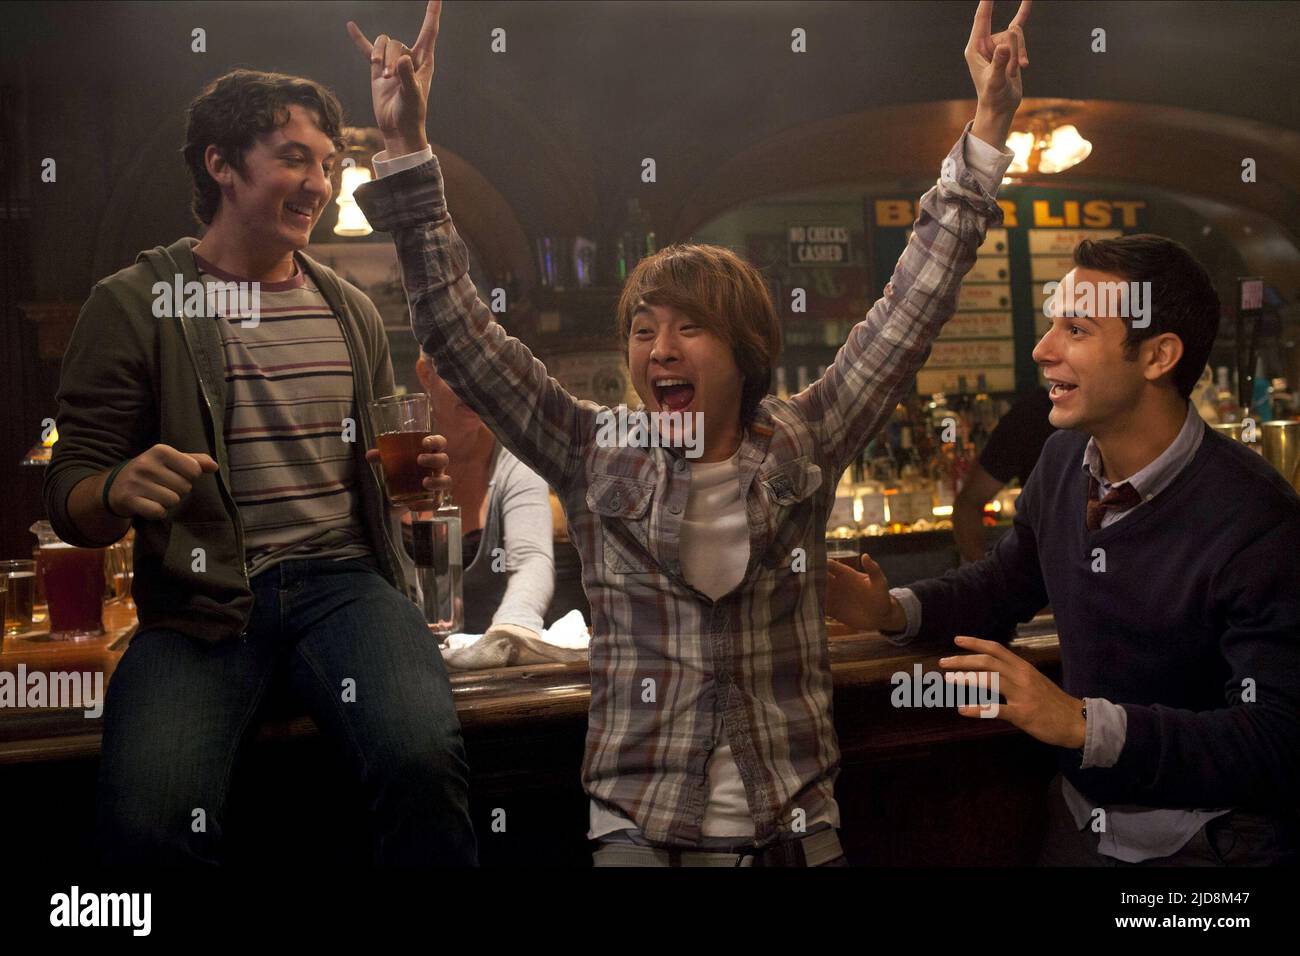 TELLER,CHON,ASTIN, 21 AND OVER, 2013, Stock Photo